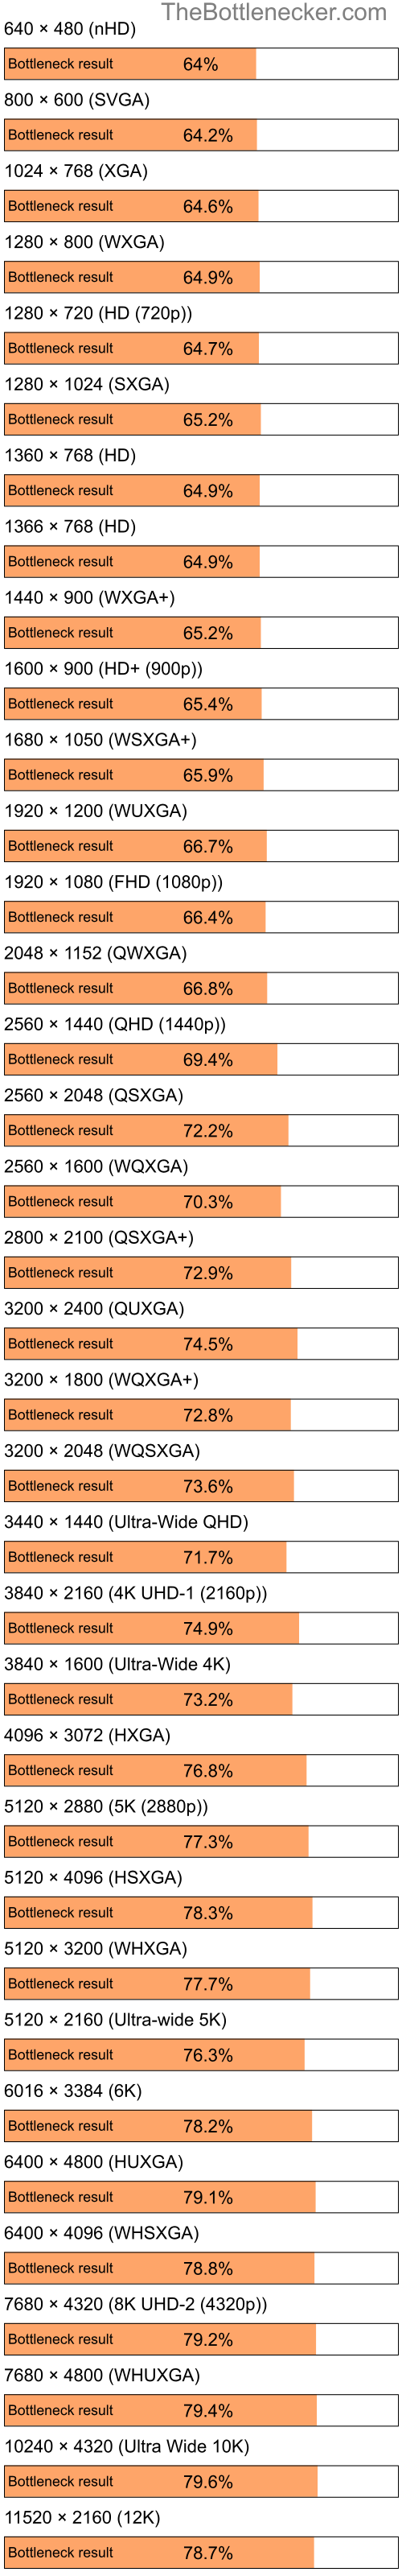 Bottleneck results by resolution for Intel Pentium 4 and AMD Mobility Radeon HD 4200 in General Tasks